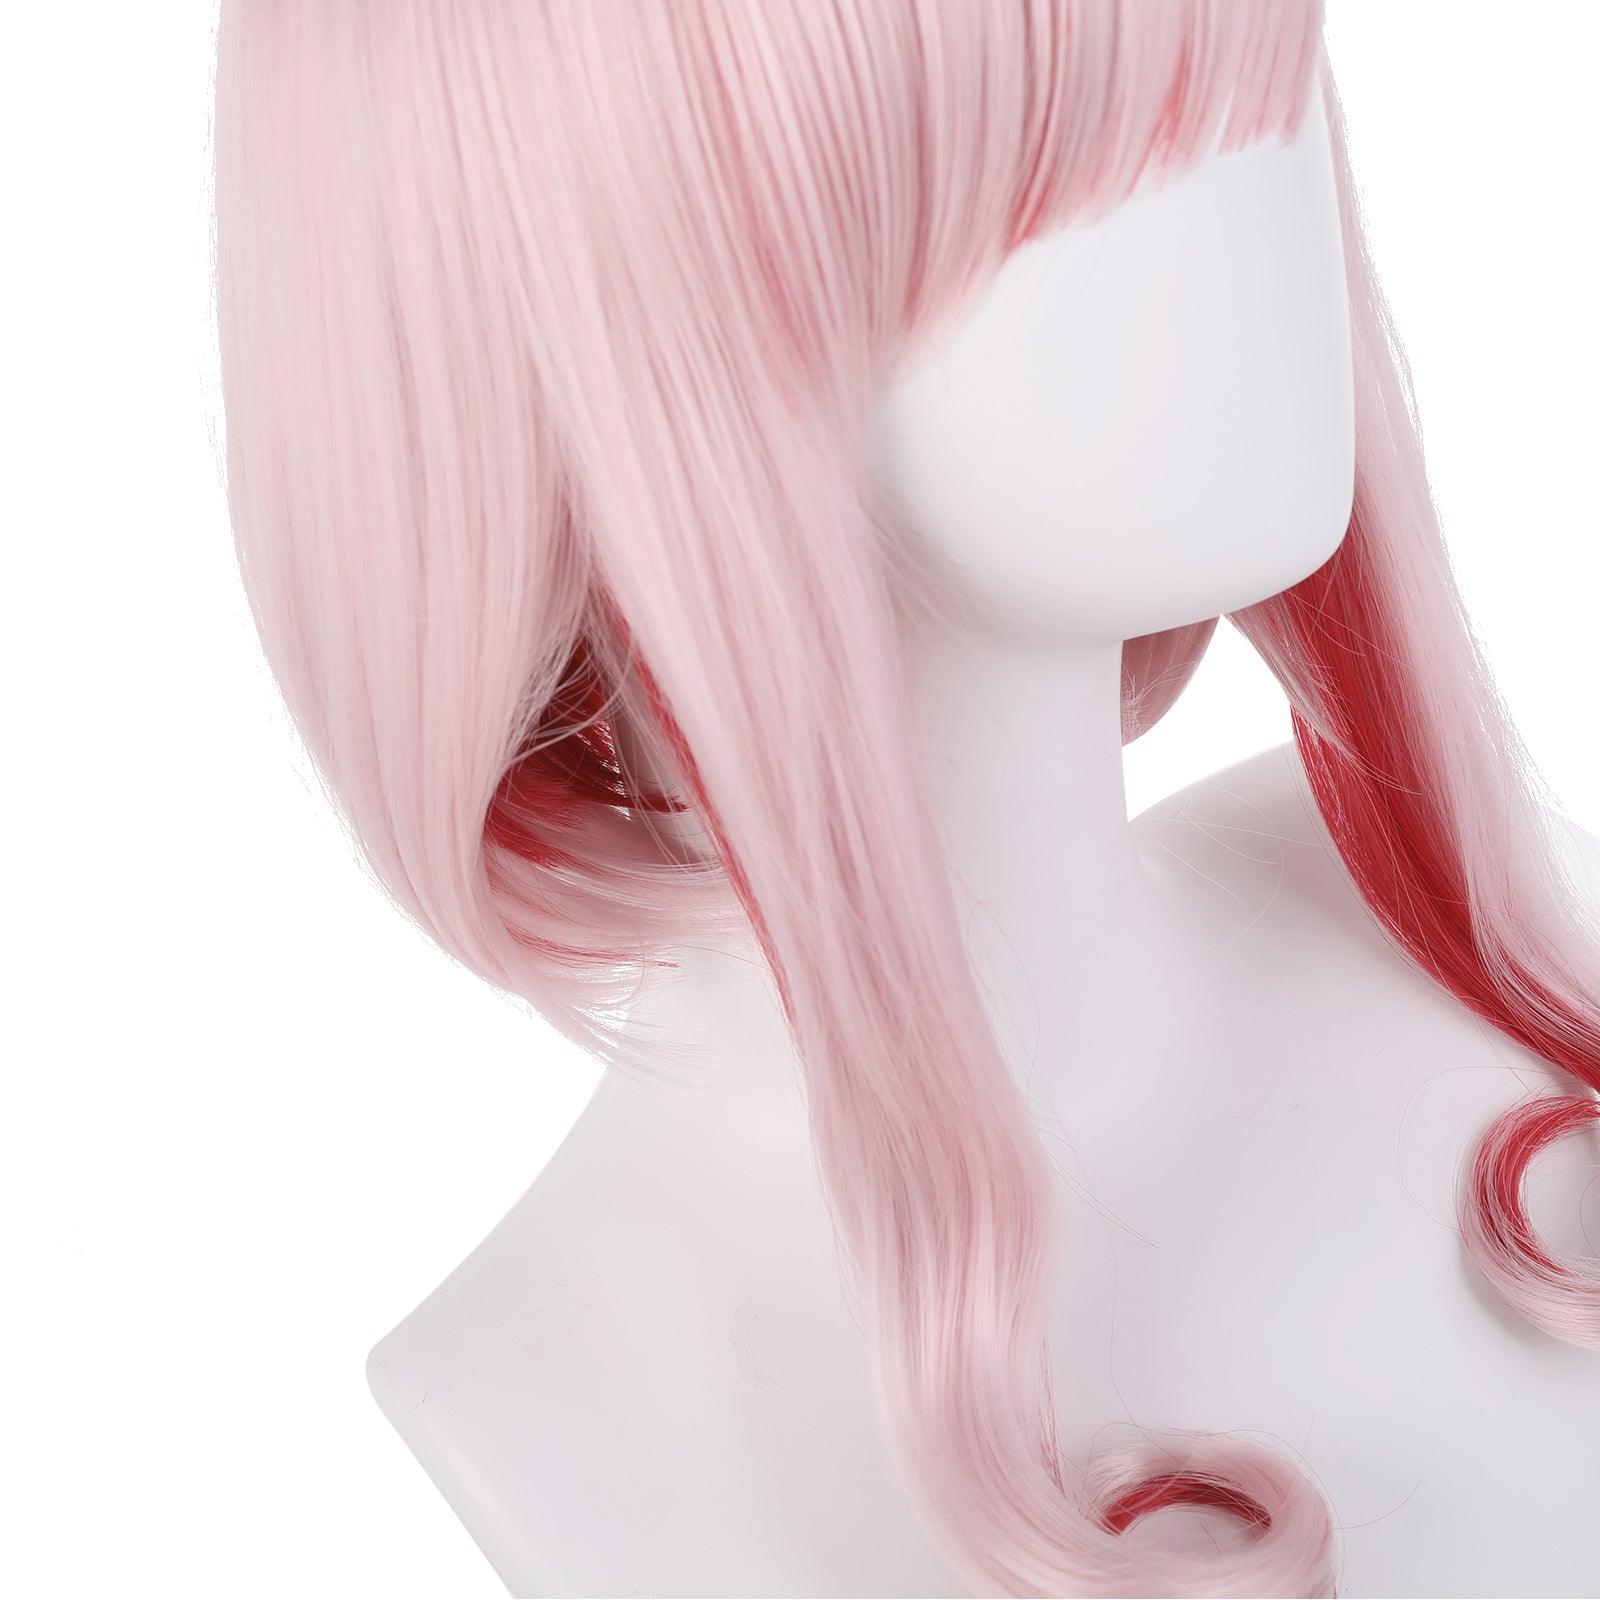 anime cosplay wigs for destiny red and pink cosplay wig of takt op destiny 529a